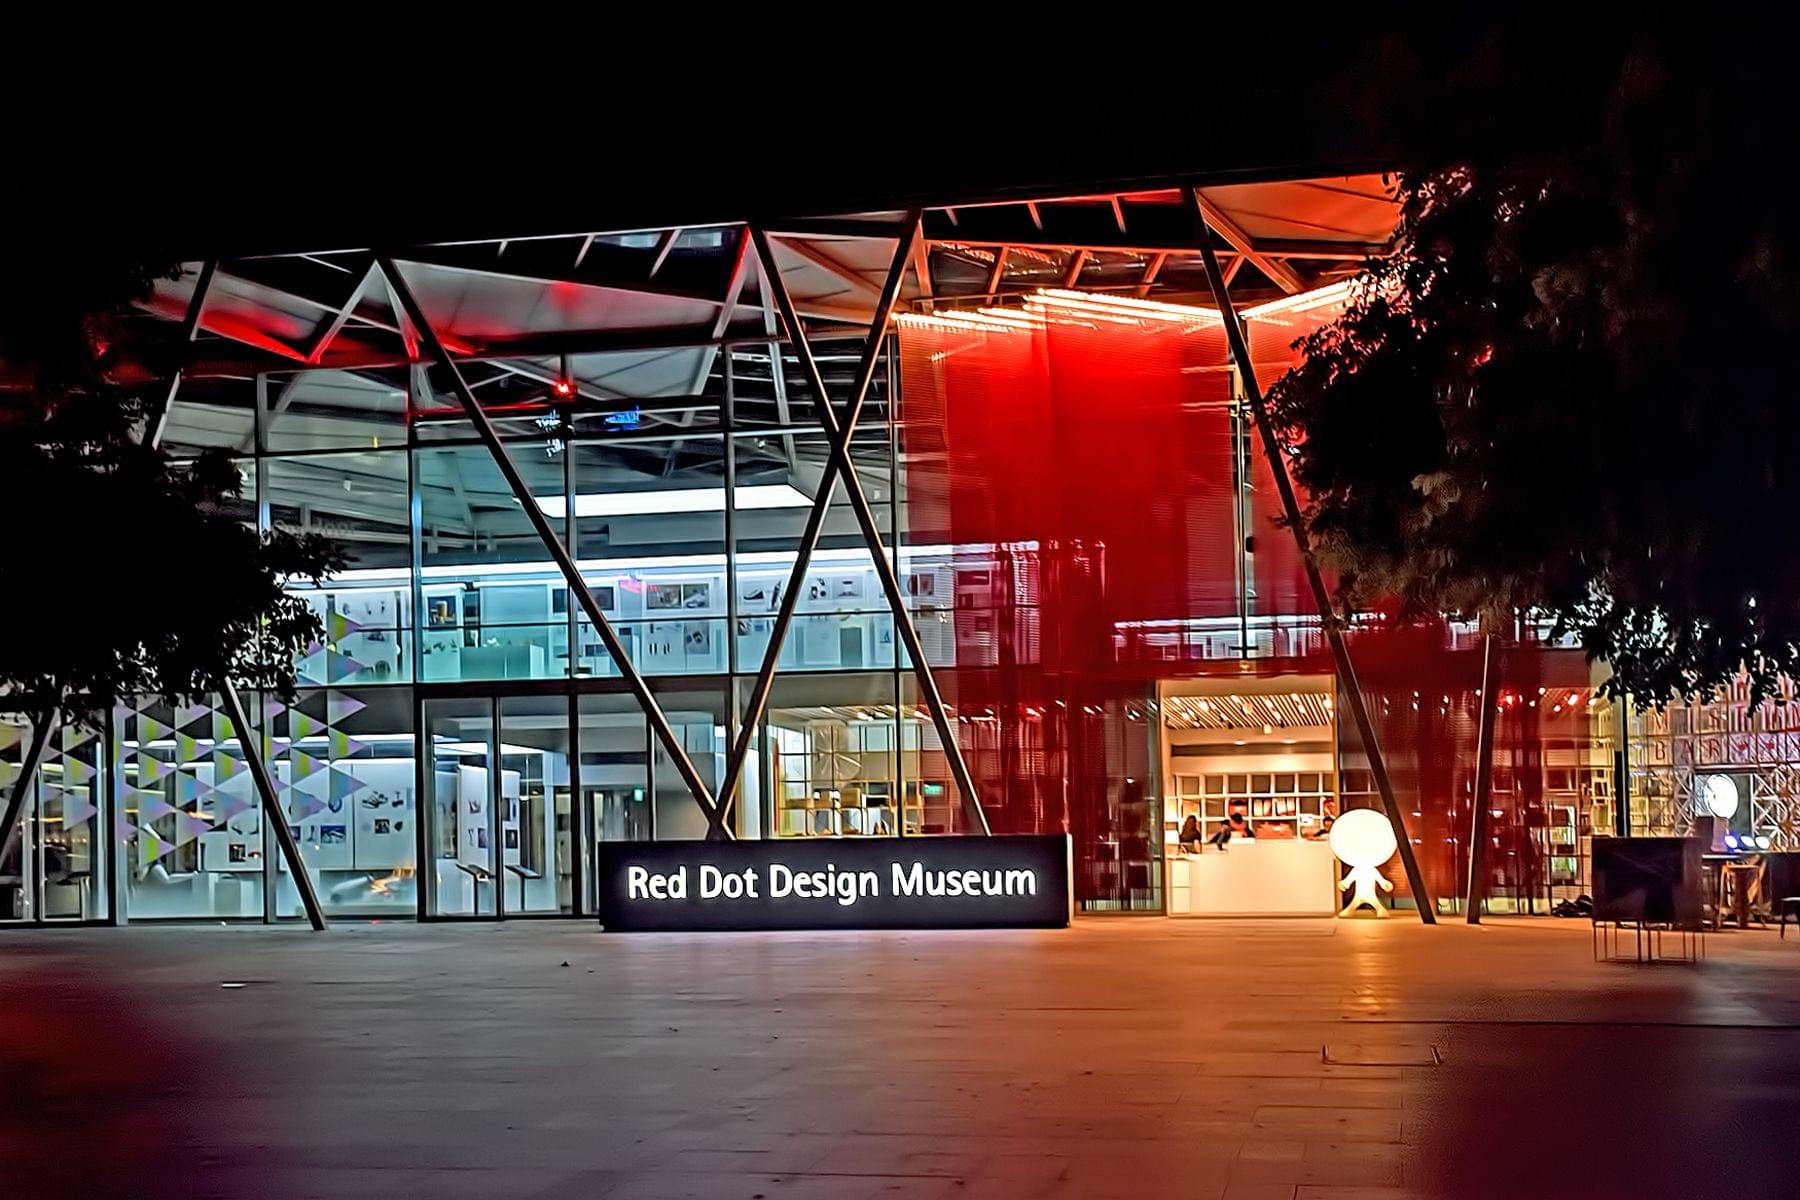 The Red Dot Design Museum Singapore